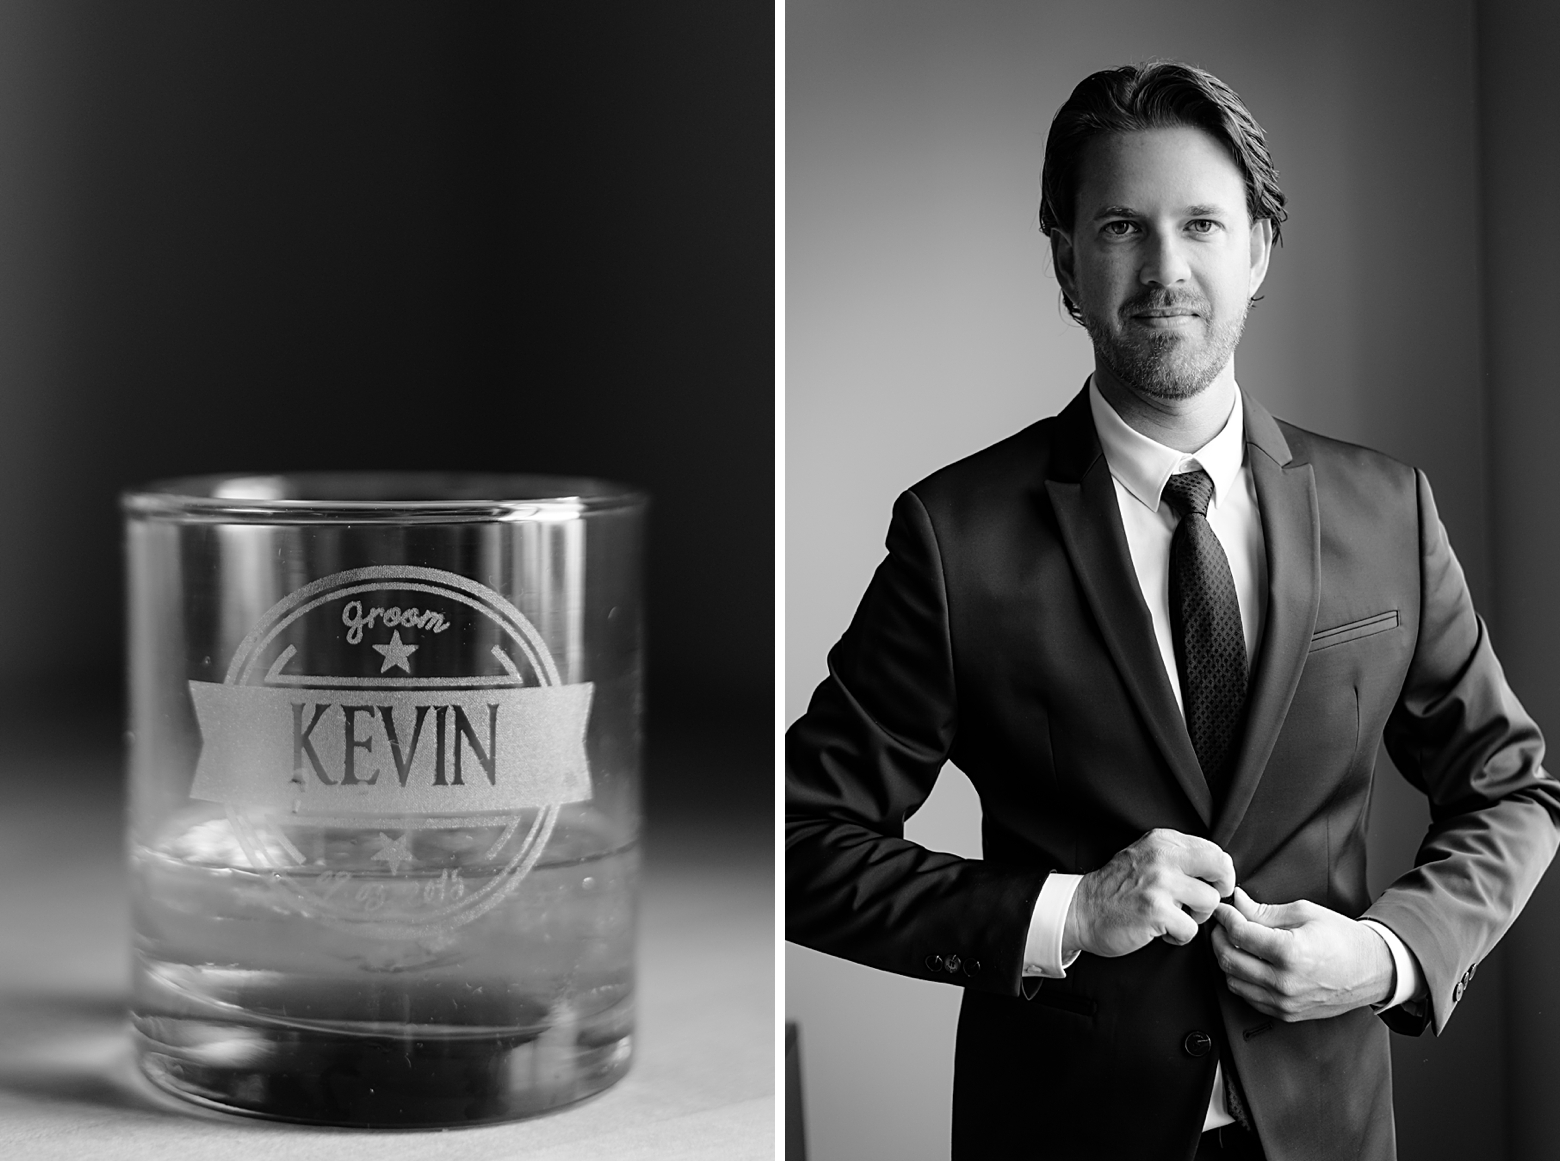 Groom portrait in classic black and white and scotch glass with engraving